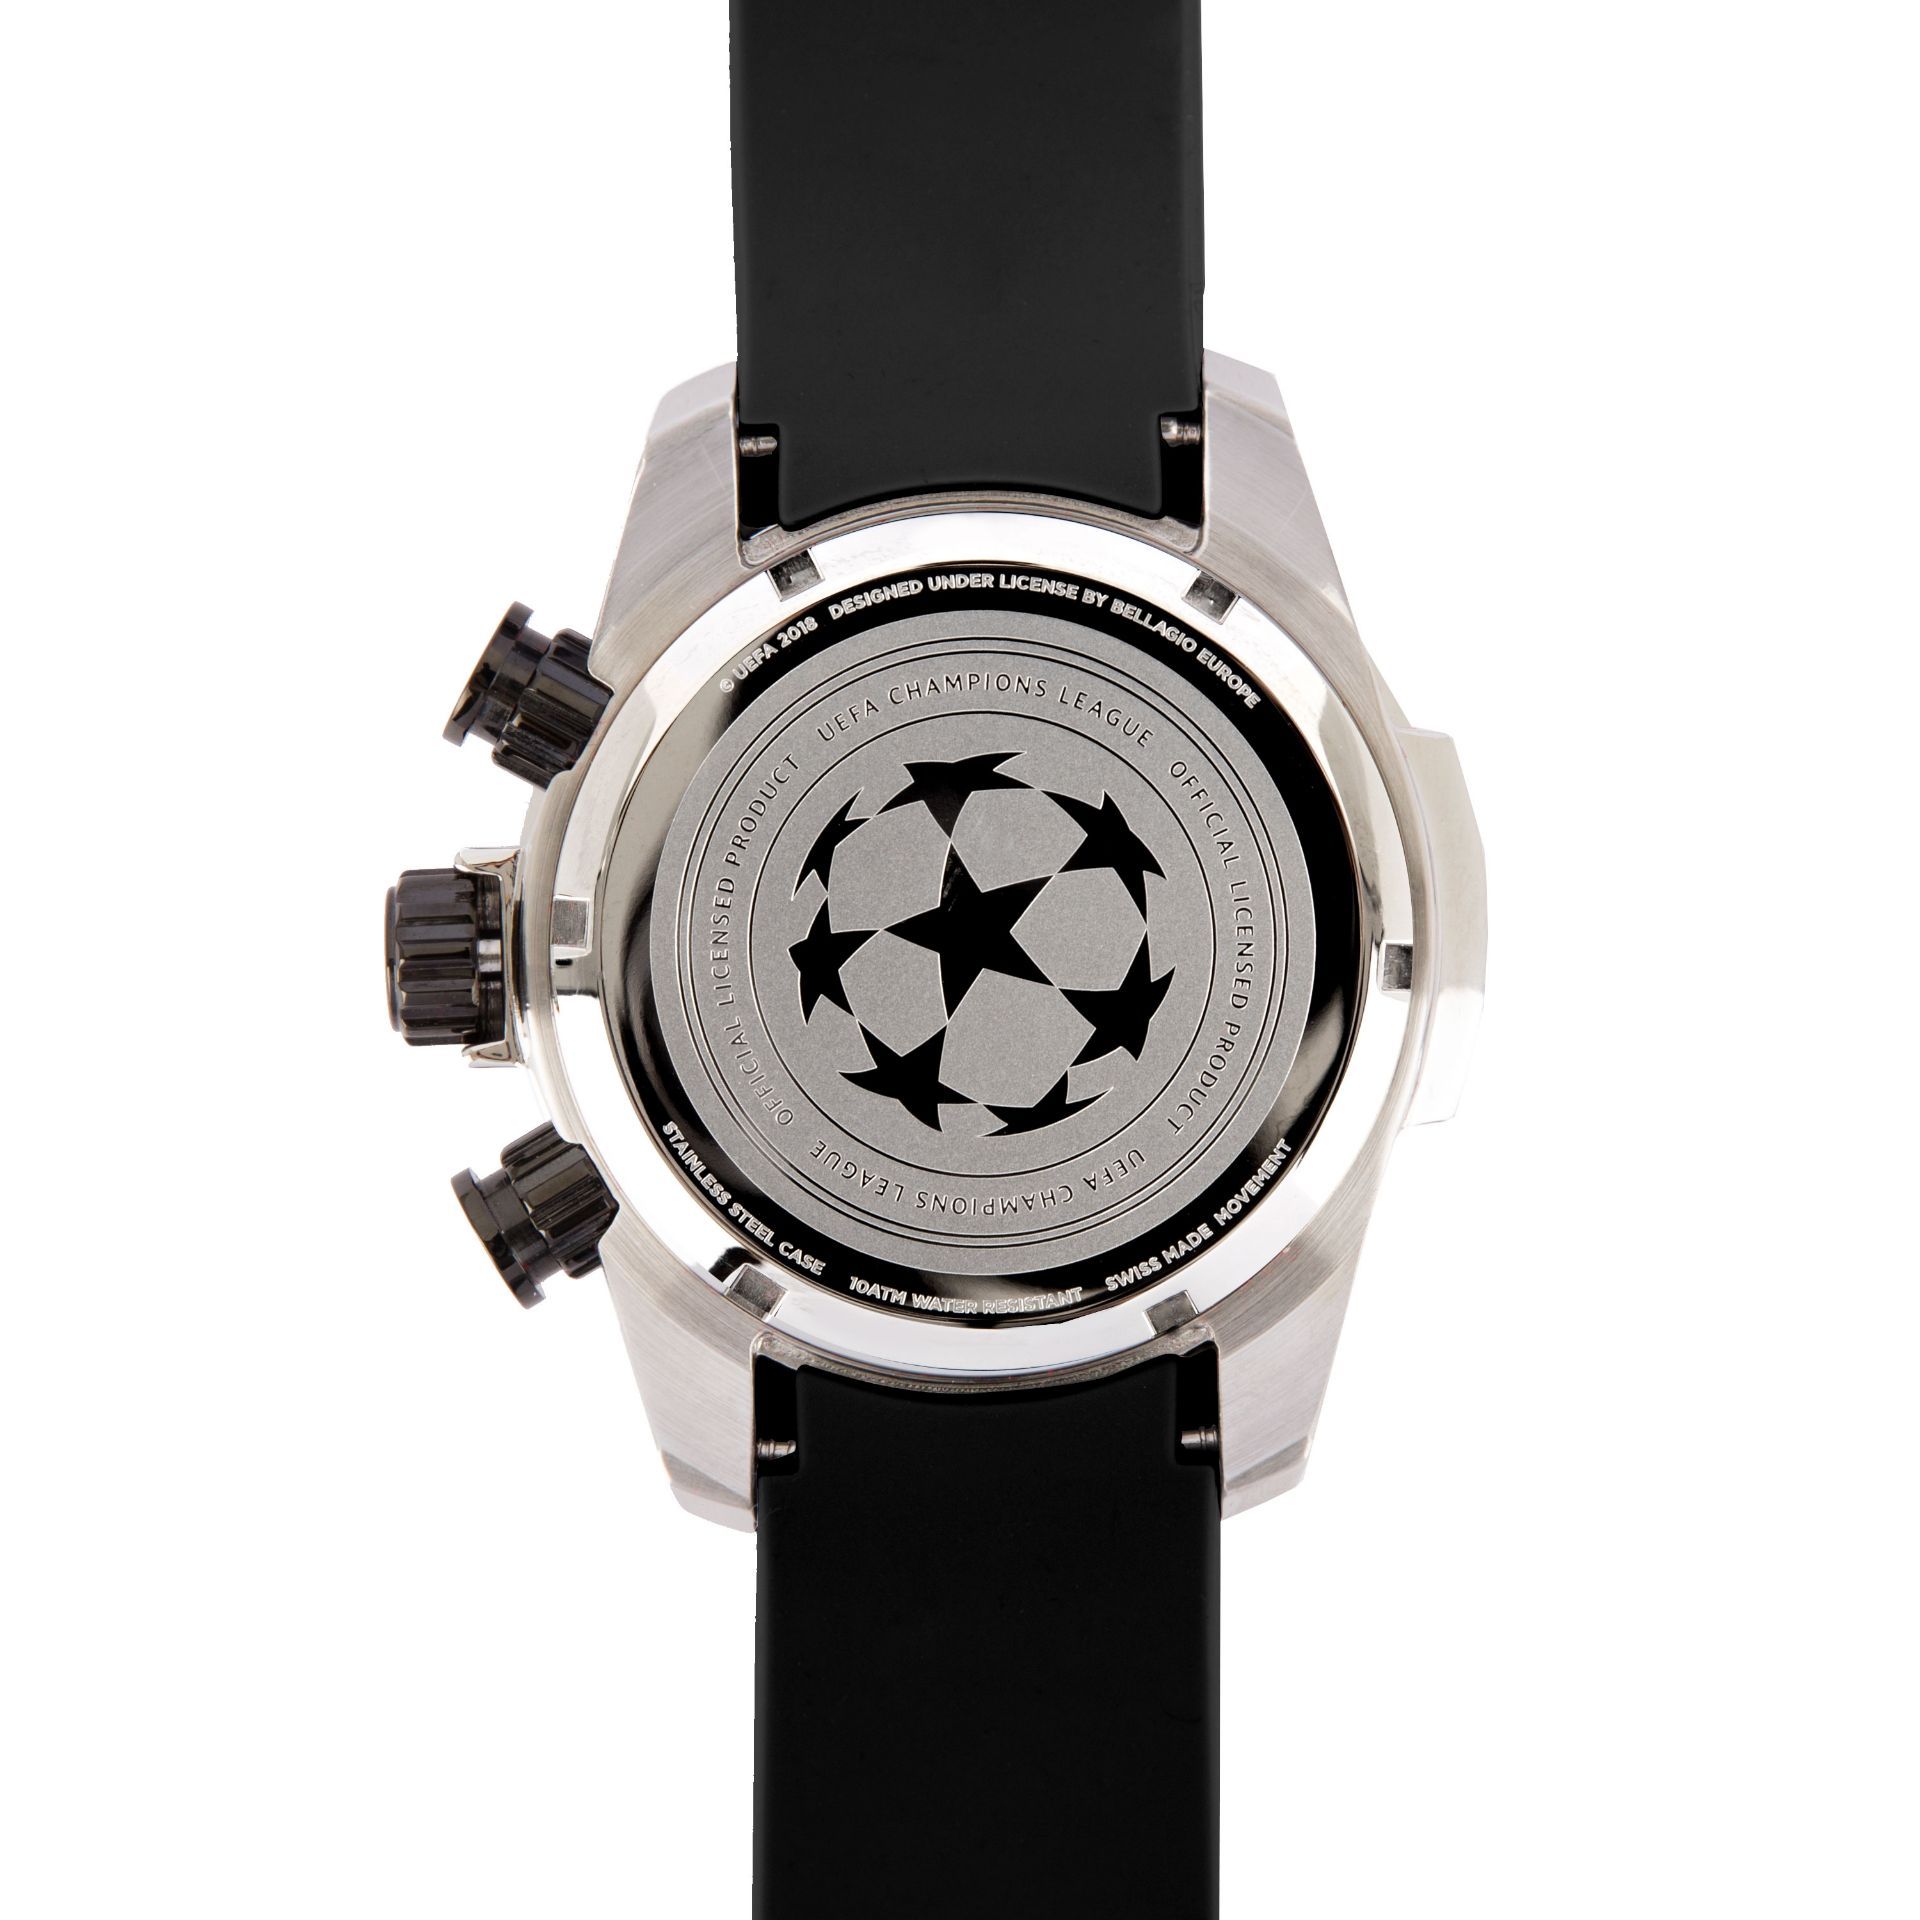 BRAND NEW OFFICIAL UEFA CHAMPIONS LEAGUE 45 MINUTES COUNTDOWN WATCH CL45-STB-BLGRP, RRP £225 - Image 3 of 5